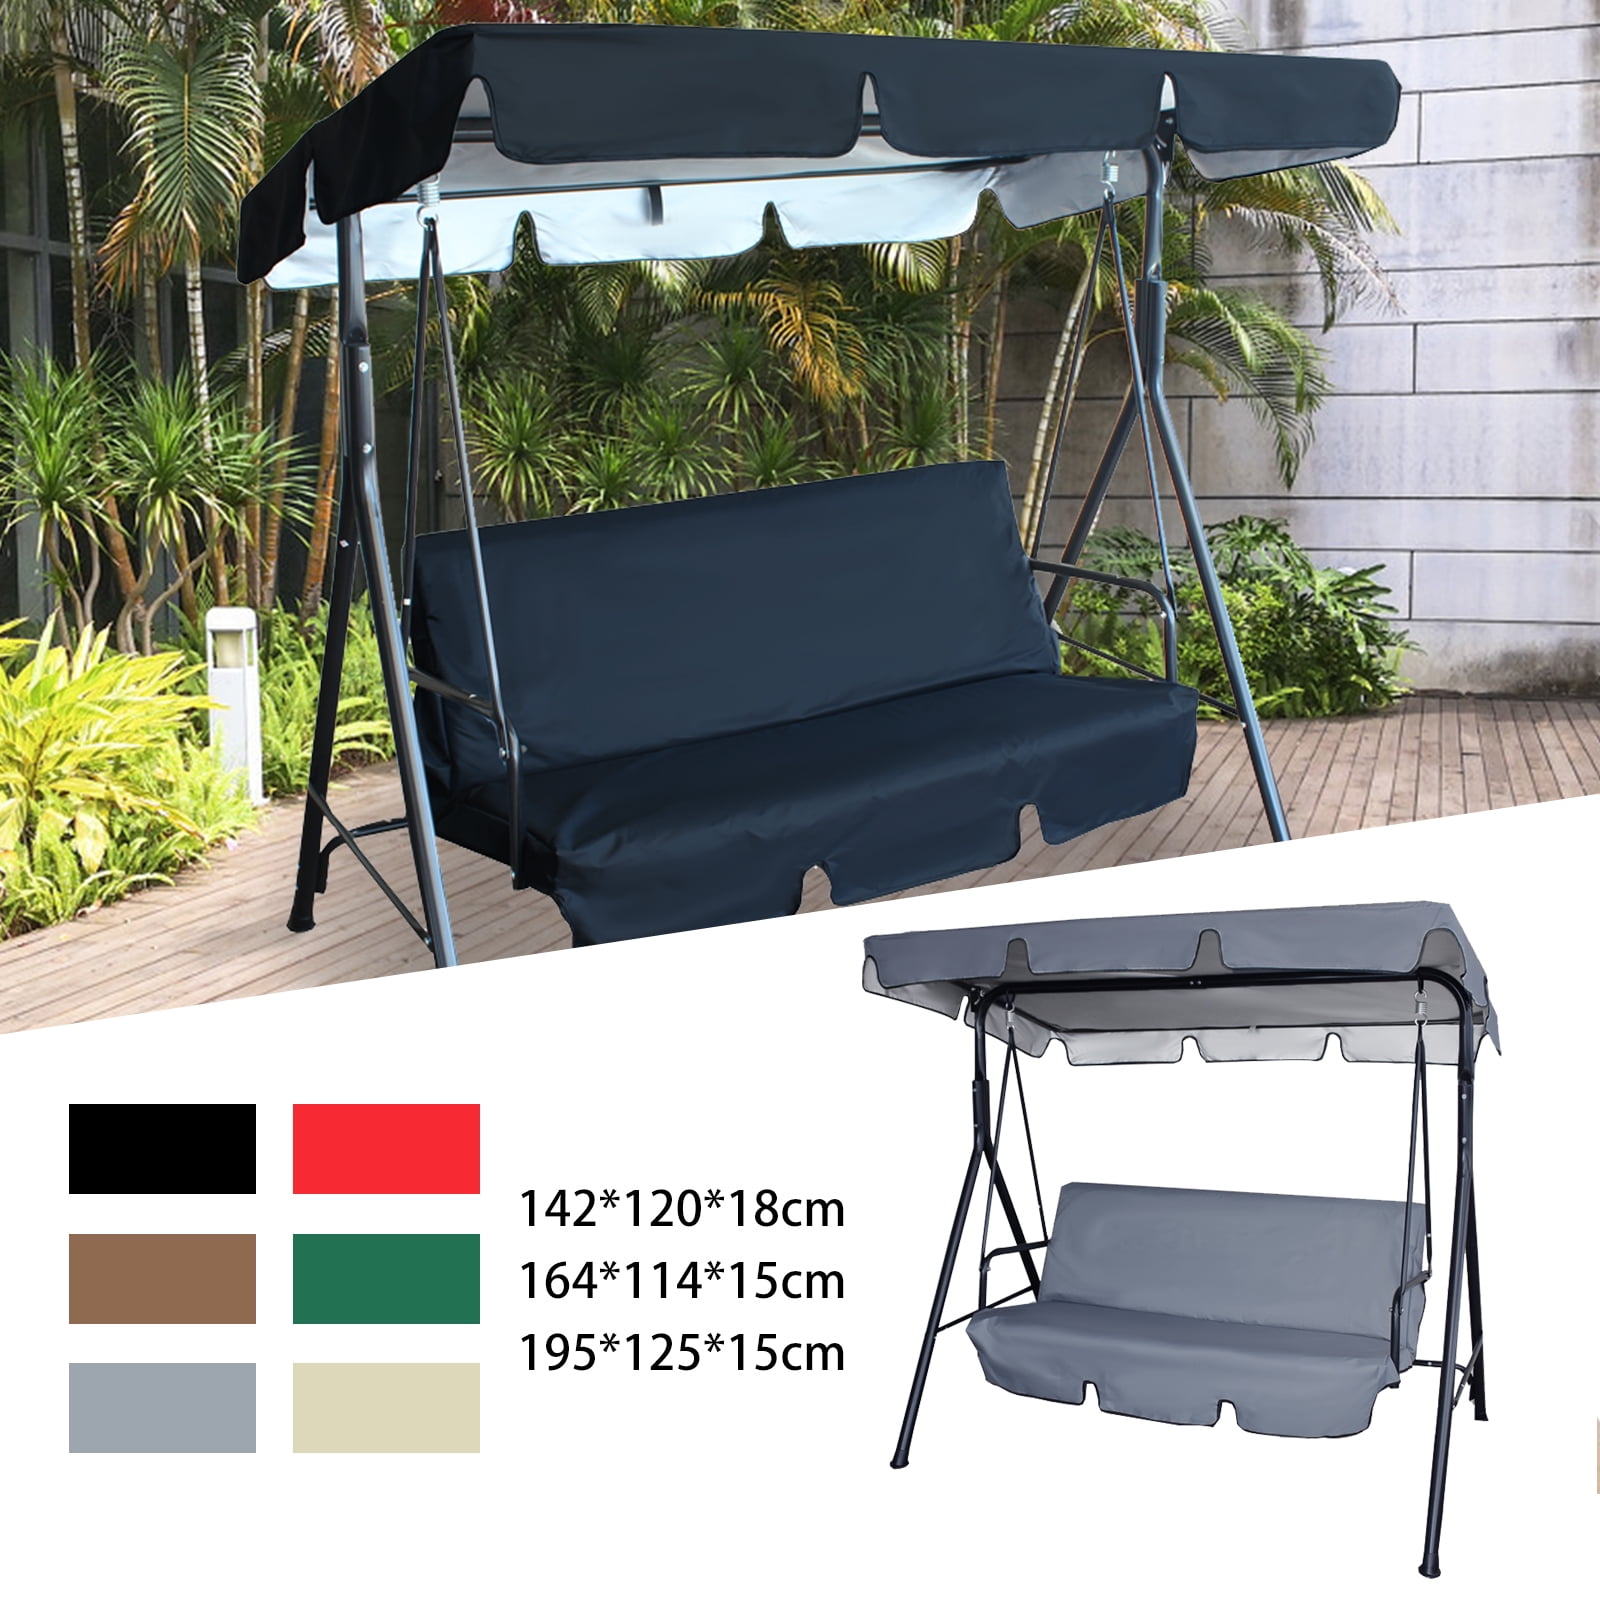 2/3 Seater Garden Swing Chair Canopy Replacement Spare Seat Cover Waterproof 